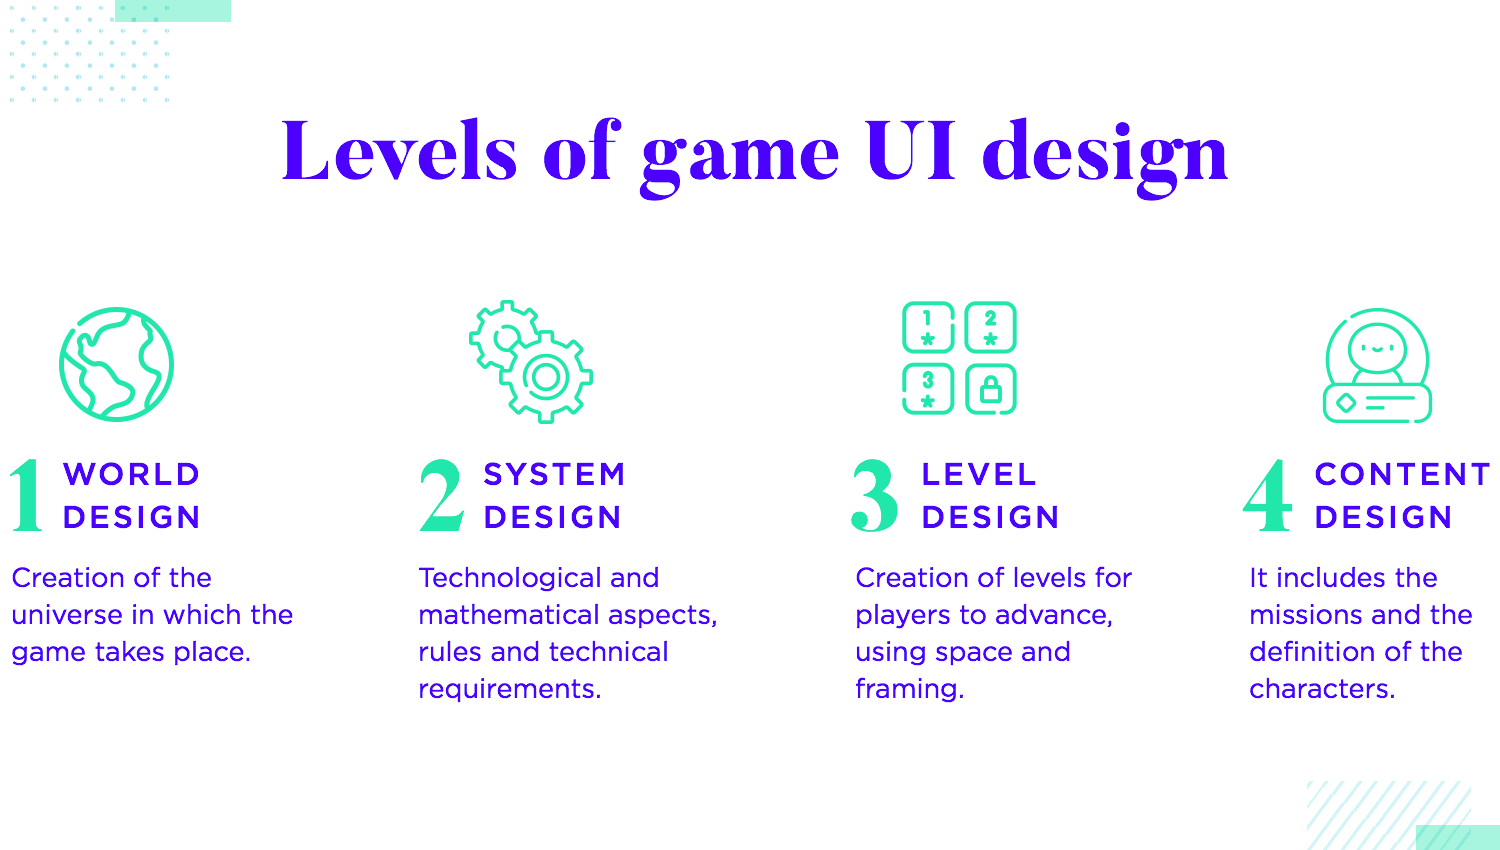 levels of game ui design from worlds to systems